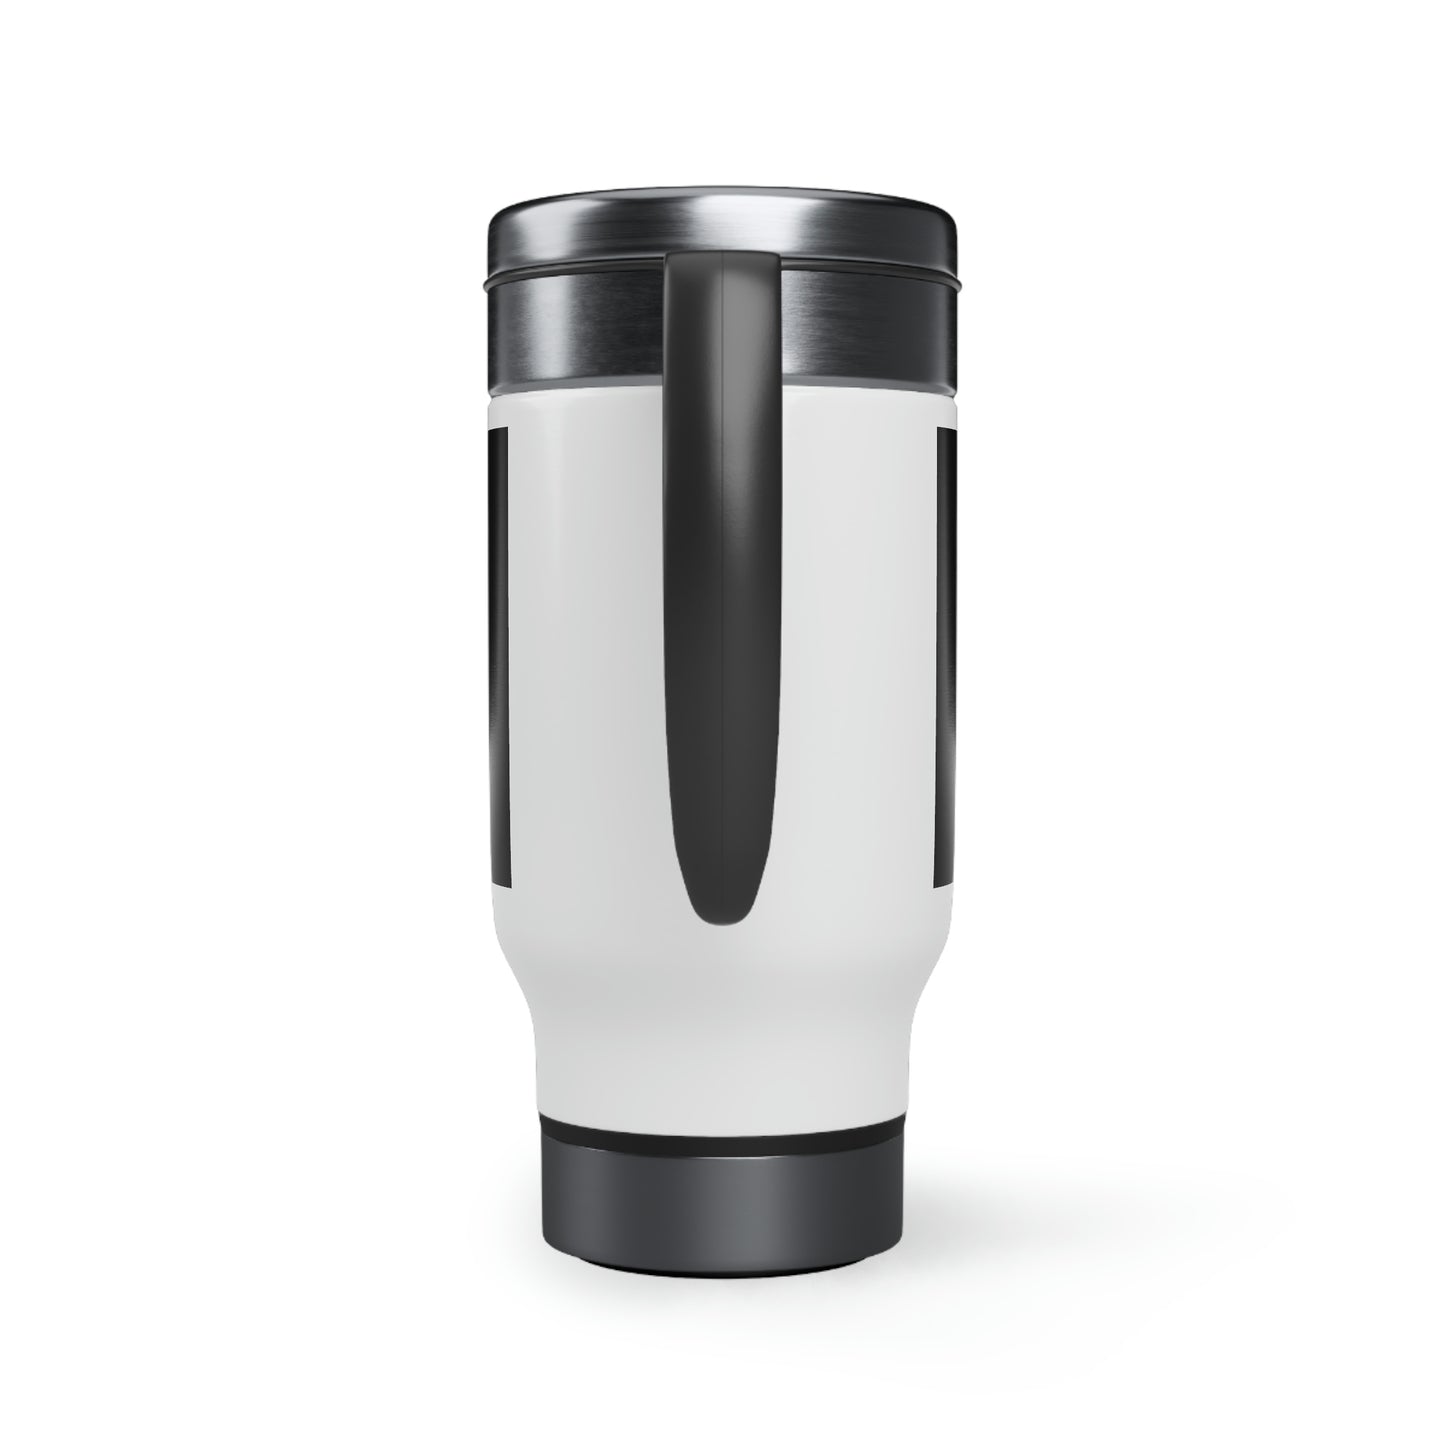 I Am The Nobody The World Saw But The One He Knew Was Worth Dying For Stainless Steel Travel Mug with Handle, 14oz